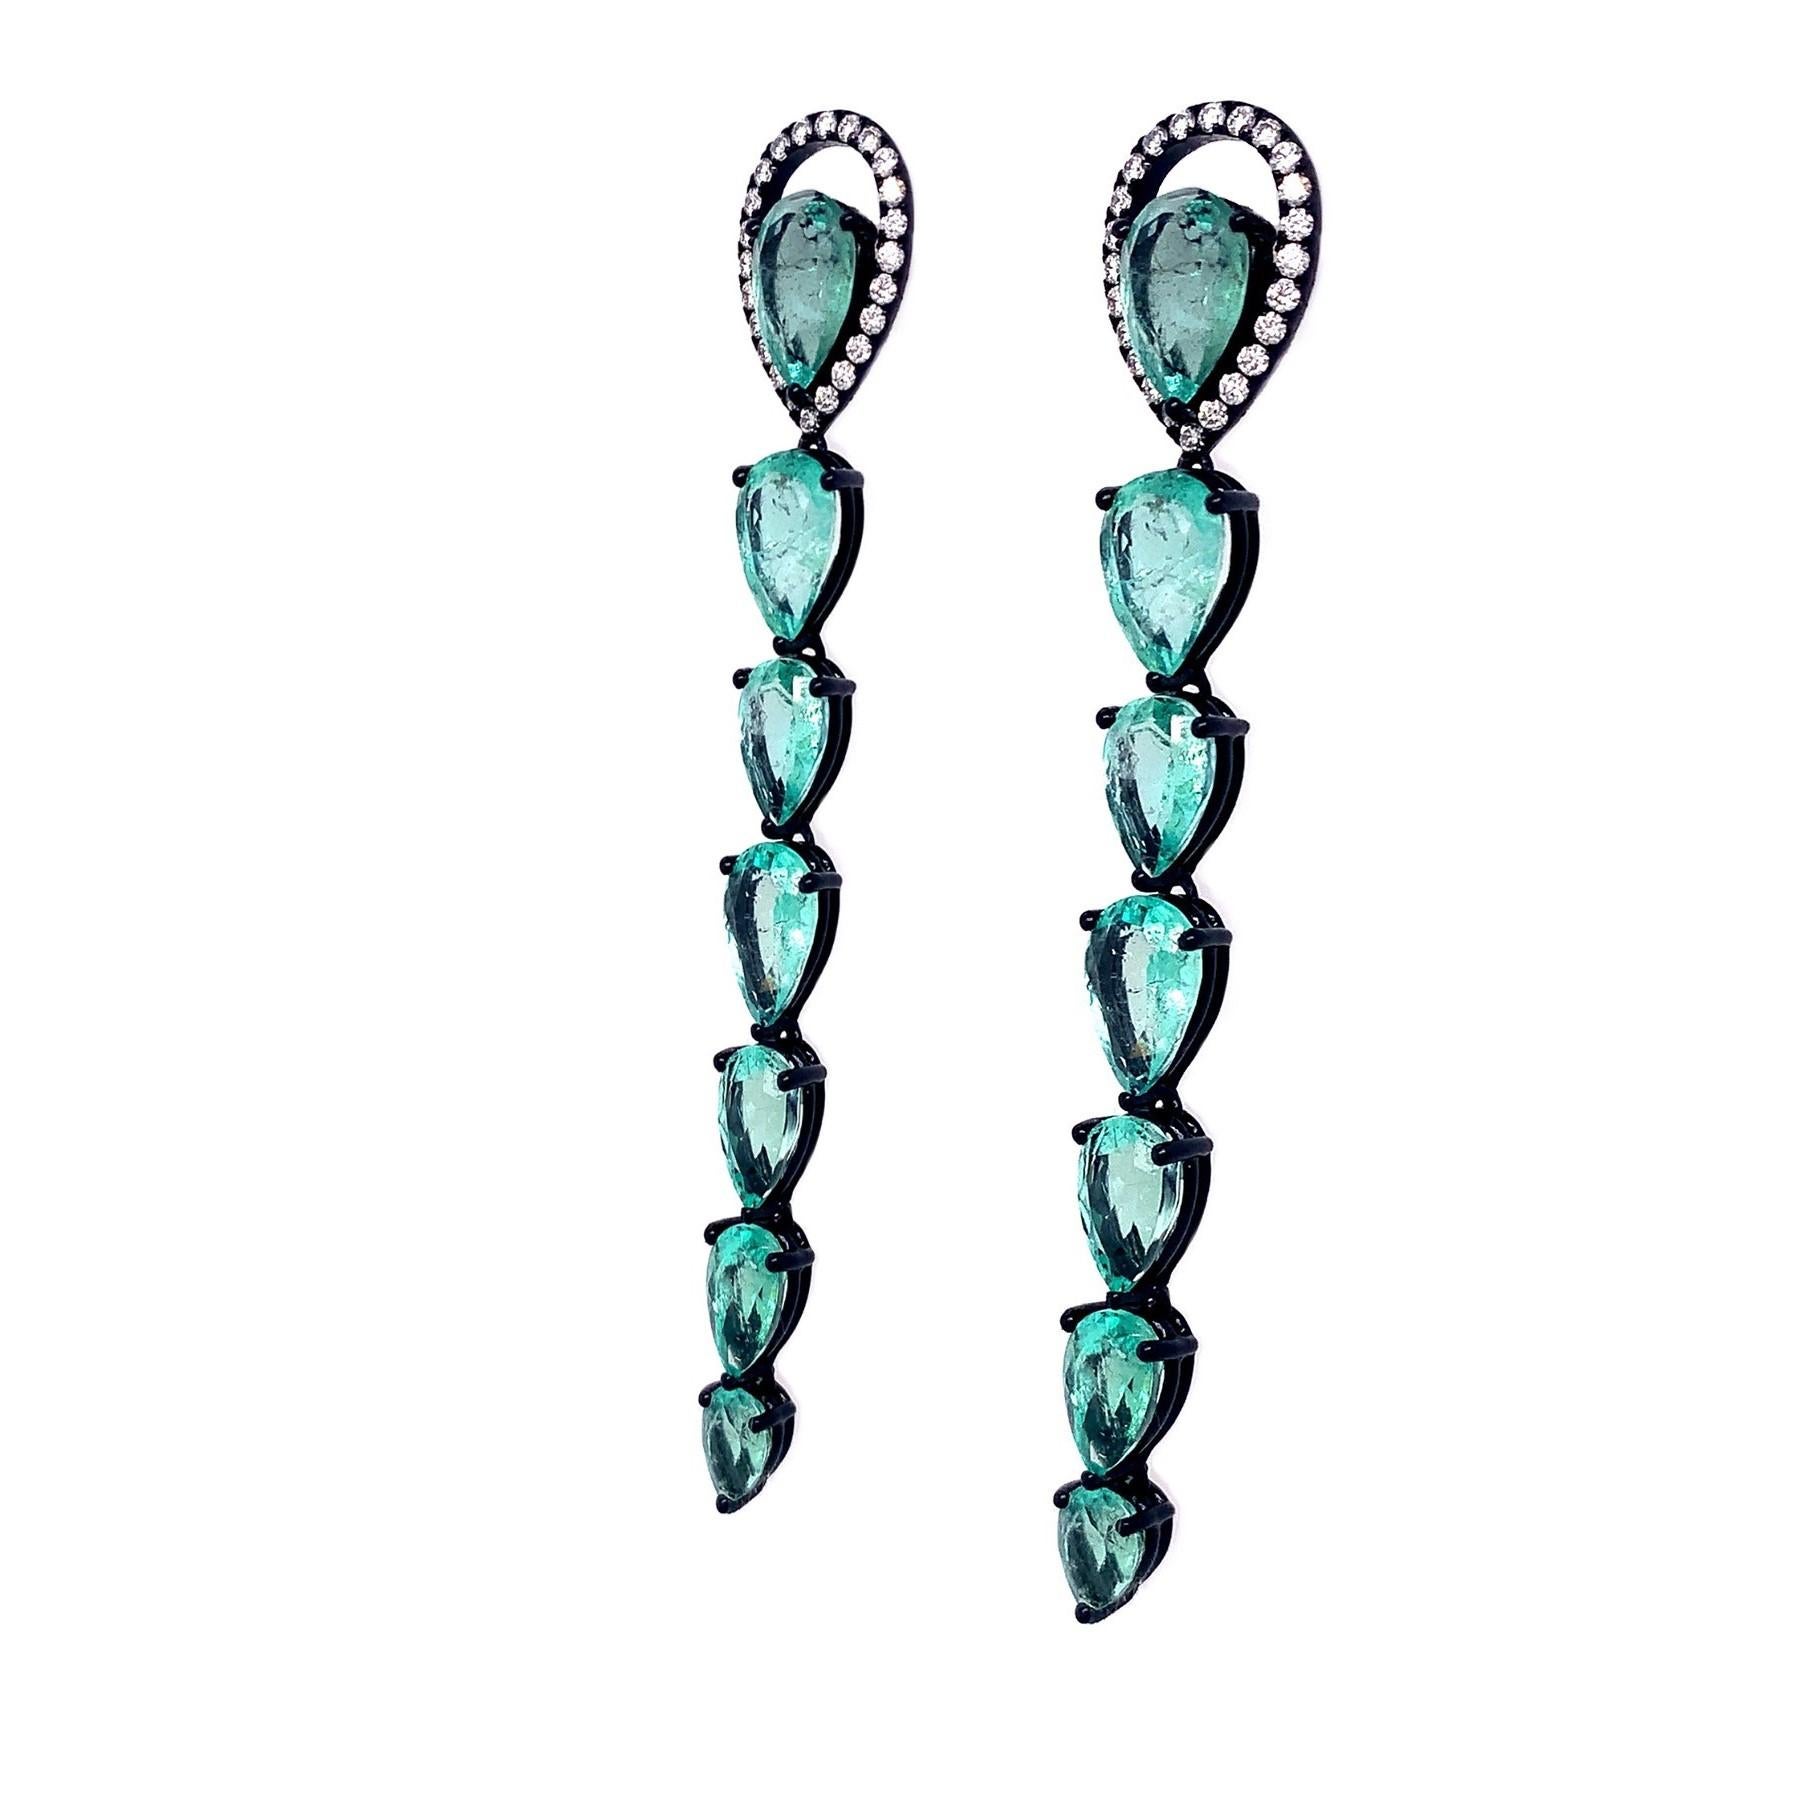 Lagoon Collection

Pear shape Emeralds with Diamonds line earring set in 18K black gold.

Emerald: 11.14 ct total weight.
Diamond: 0.41 ct total weight.
All diamonds are G-H/SI stones.